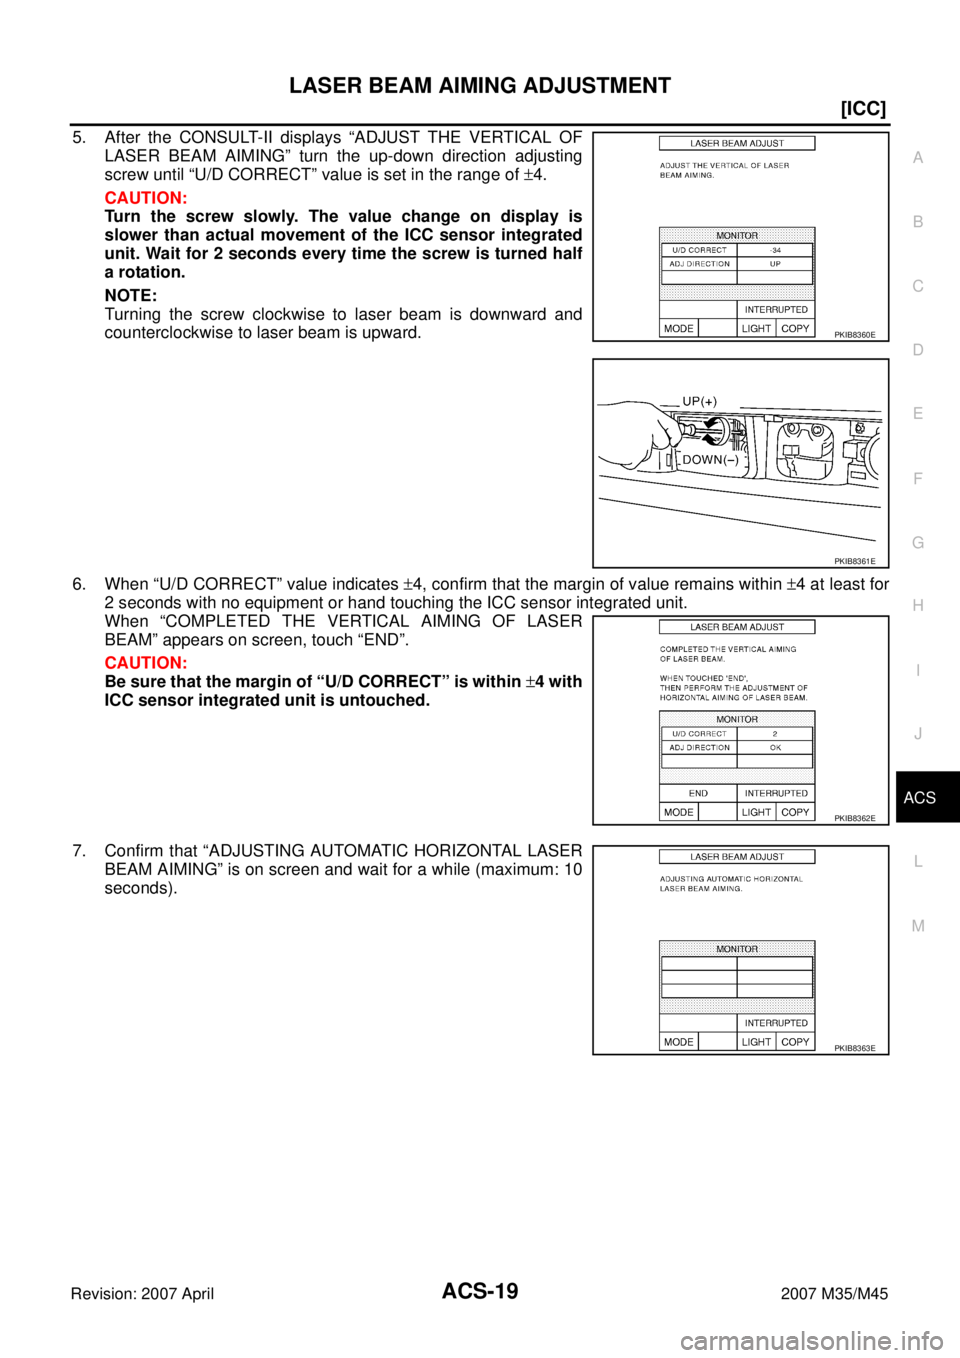 INFINITI M35 2007  Factory Owners Manual LASER BEAM AIMING ADJUSTMENT
ACS-19
[ICC]
C
D
E
F
G
H
I
J
L
MA
B
ACS
Revision: 2007 April2007 M35/M45
5. After the CONSULT-II displays “ADJUST THE VERTICAL OF
LASER BEAM AIMING” turn the up-down d